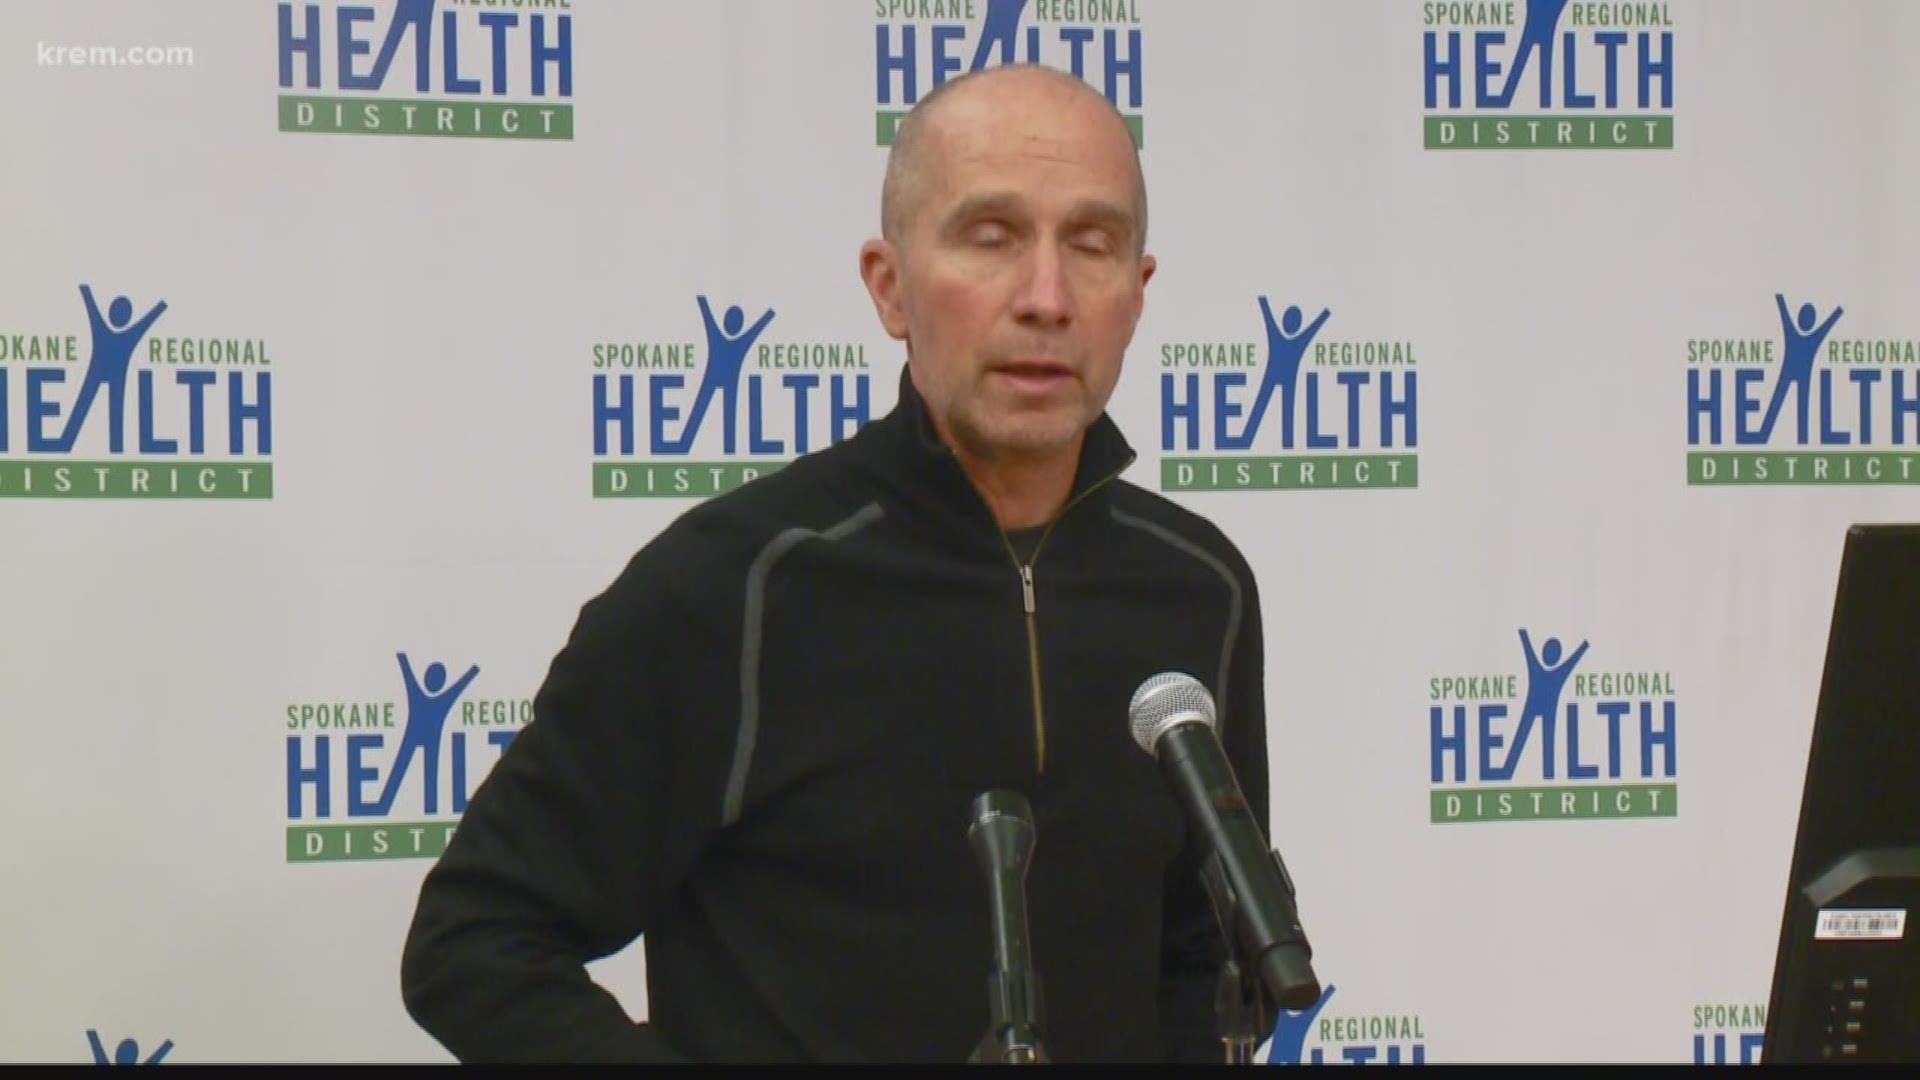 One person who tested positive for the virus did not travel but health officials believe they may have had contact with someone in Seattle.